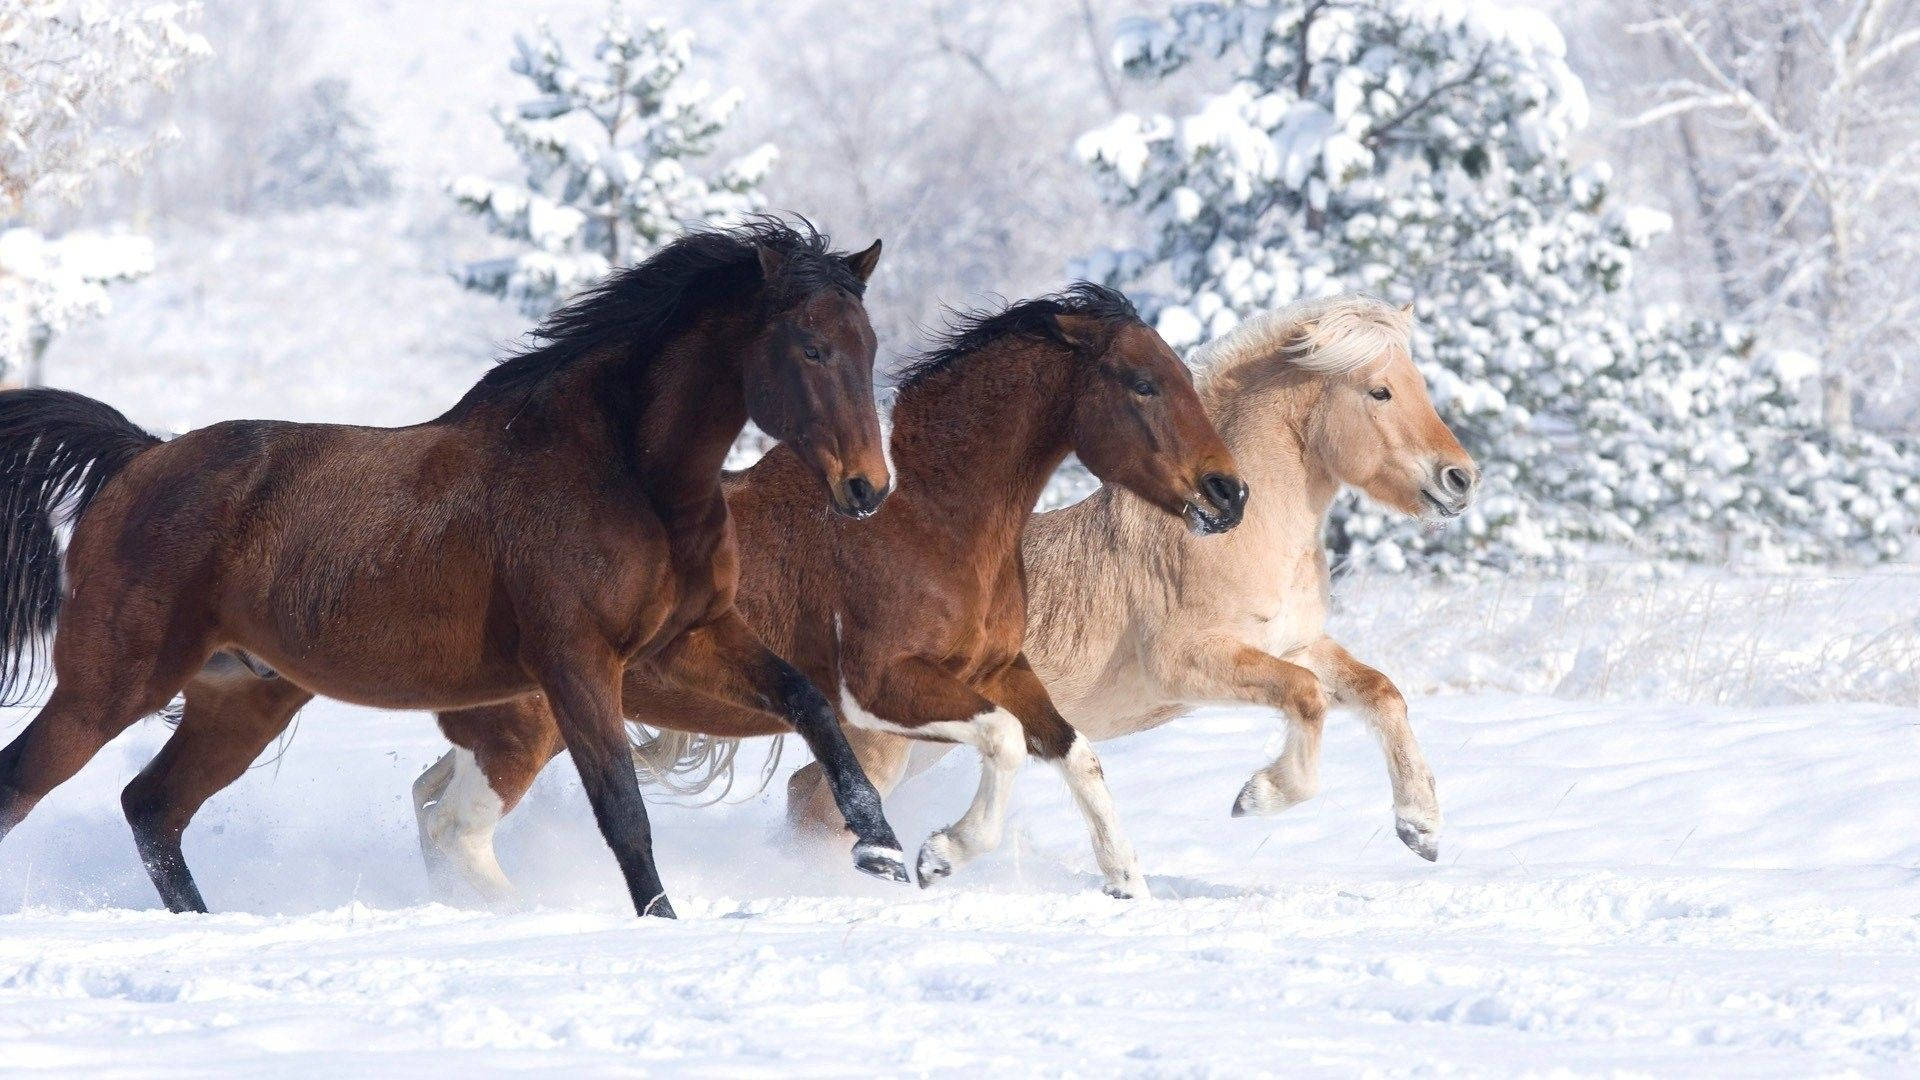 Cute Horses In Snowy Forest